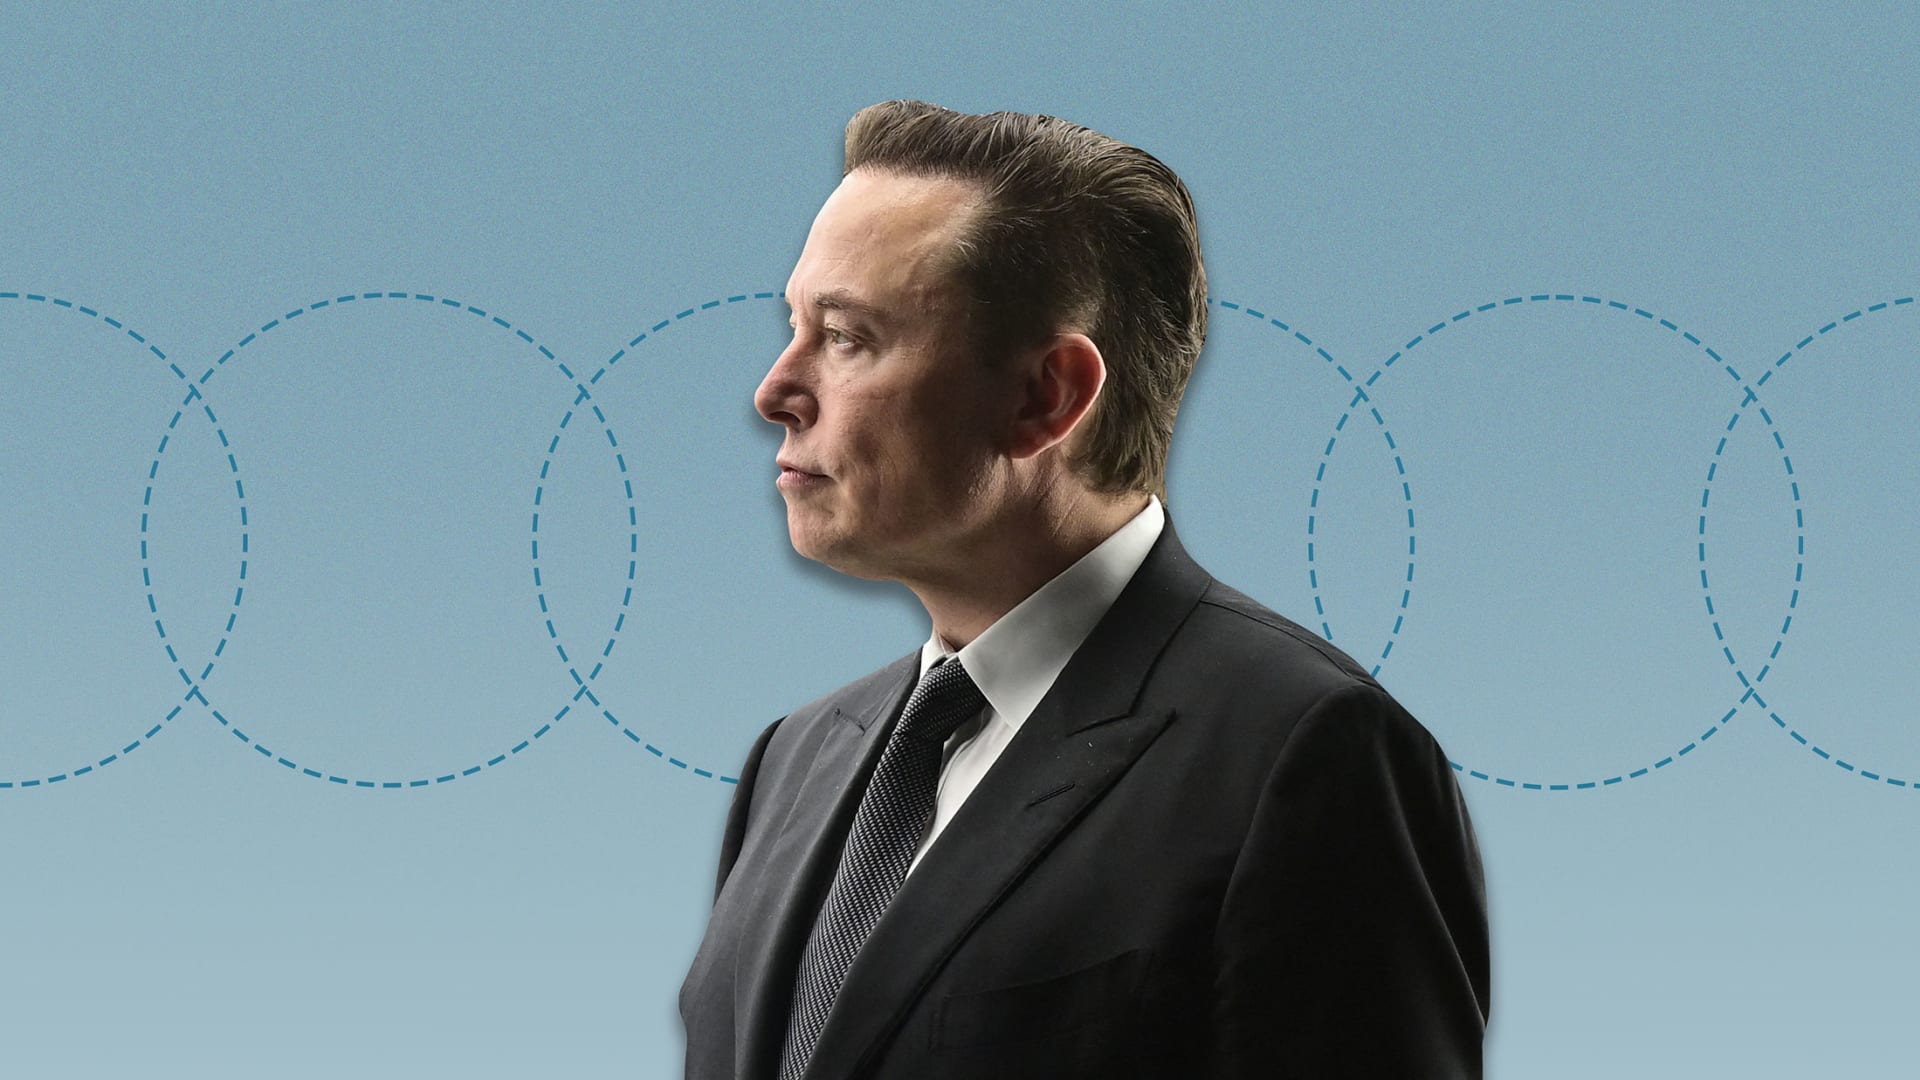 In Just 2 Sentences, Elon Musk Taught a Great Leadership Lesson to Every Employee